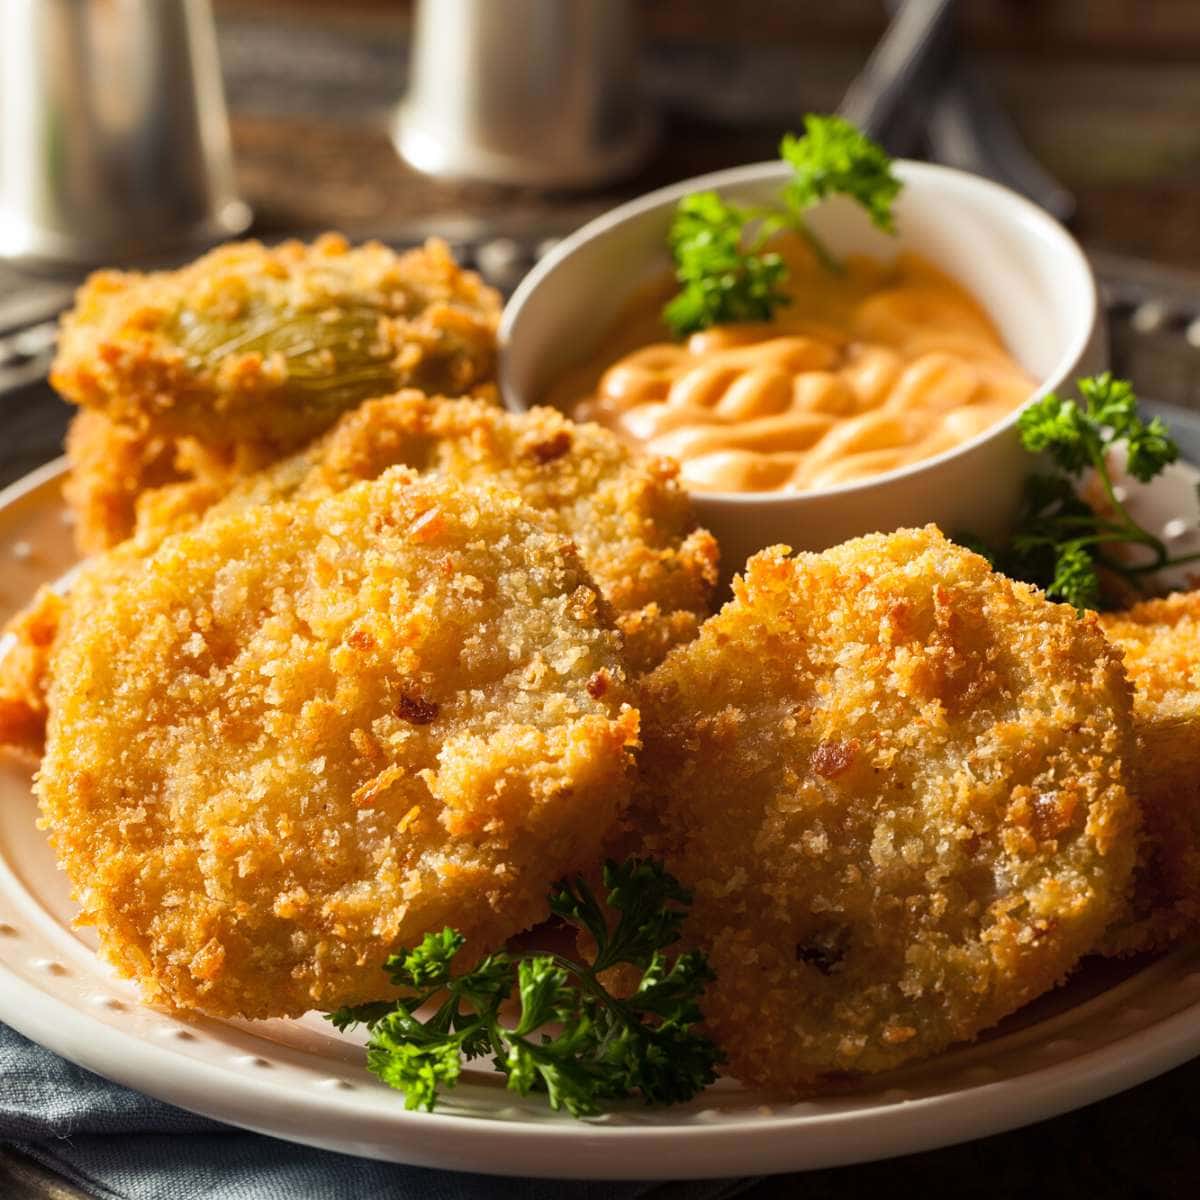 Fried green tomatoes on a plate next to macaroni and cheese.